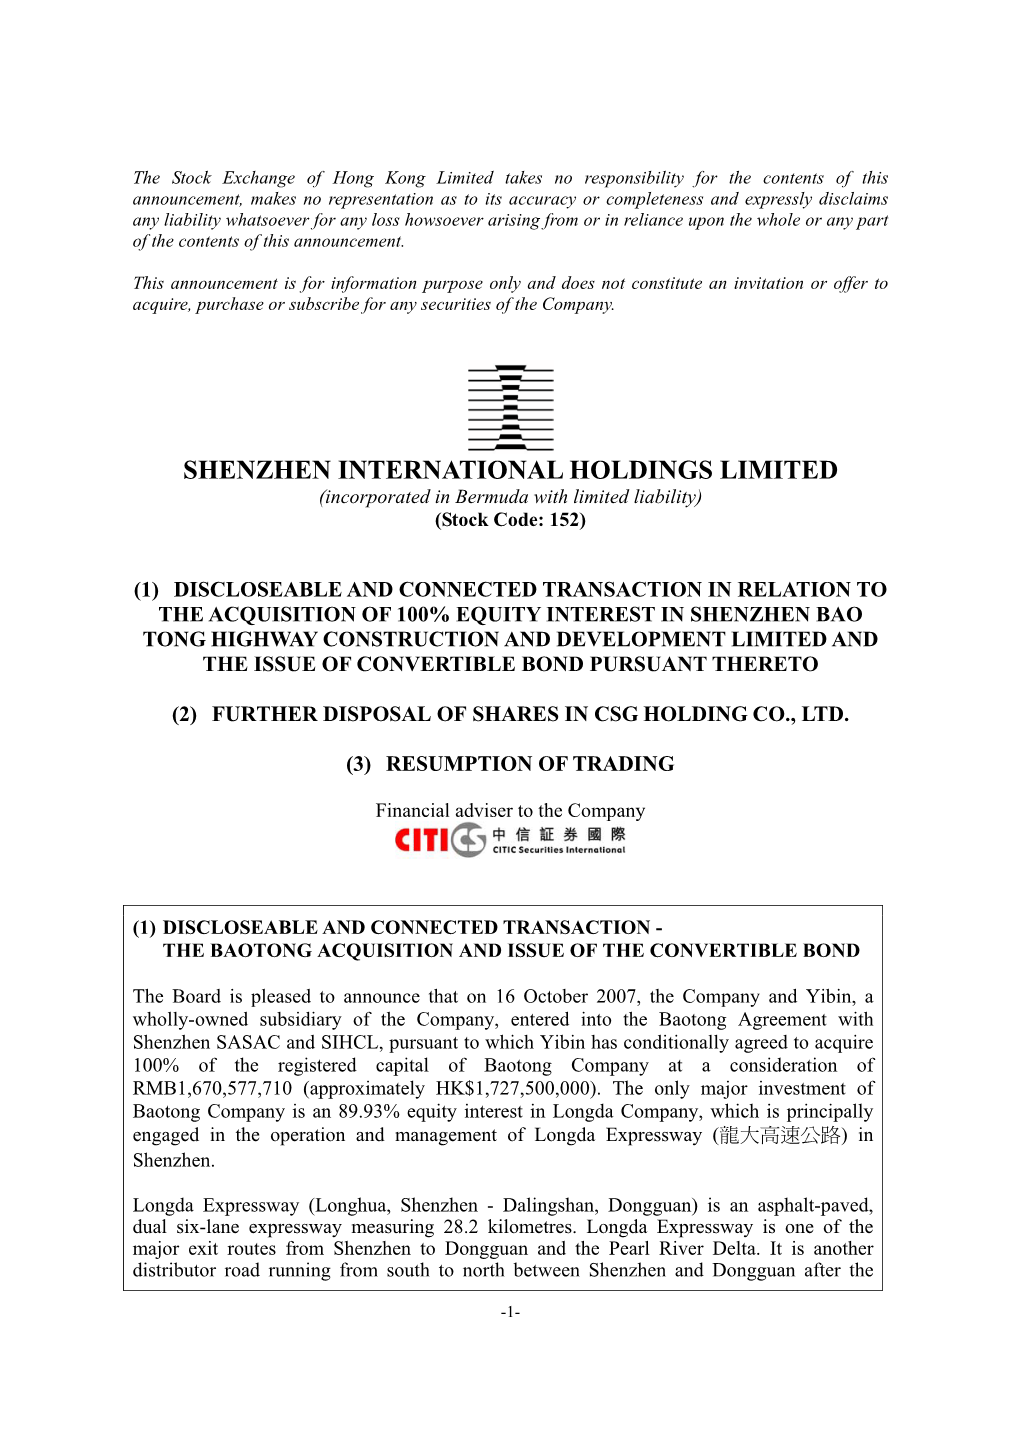 SHENZHEN INTERNATIONAL HOLDINGS LIMITED (Incorporated in Bermuda with Limited Liability) (Stock Code: 152)